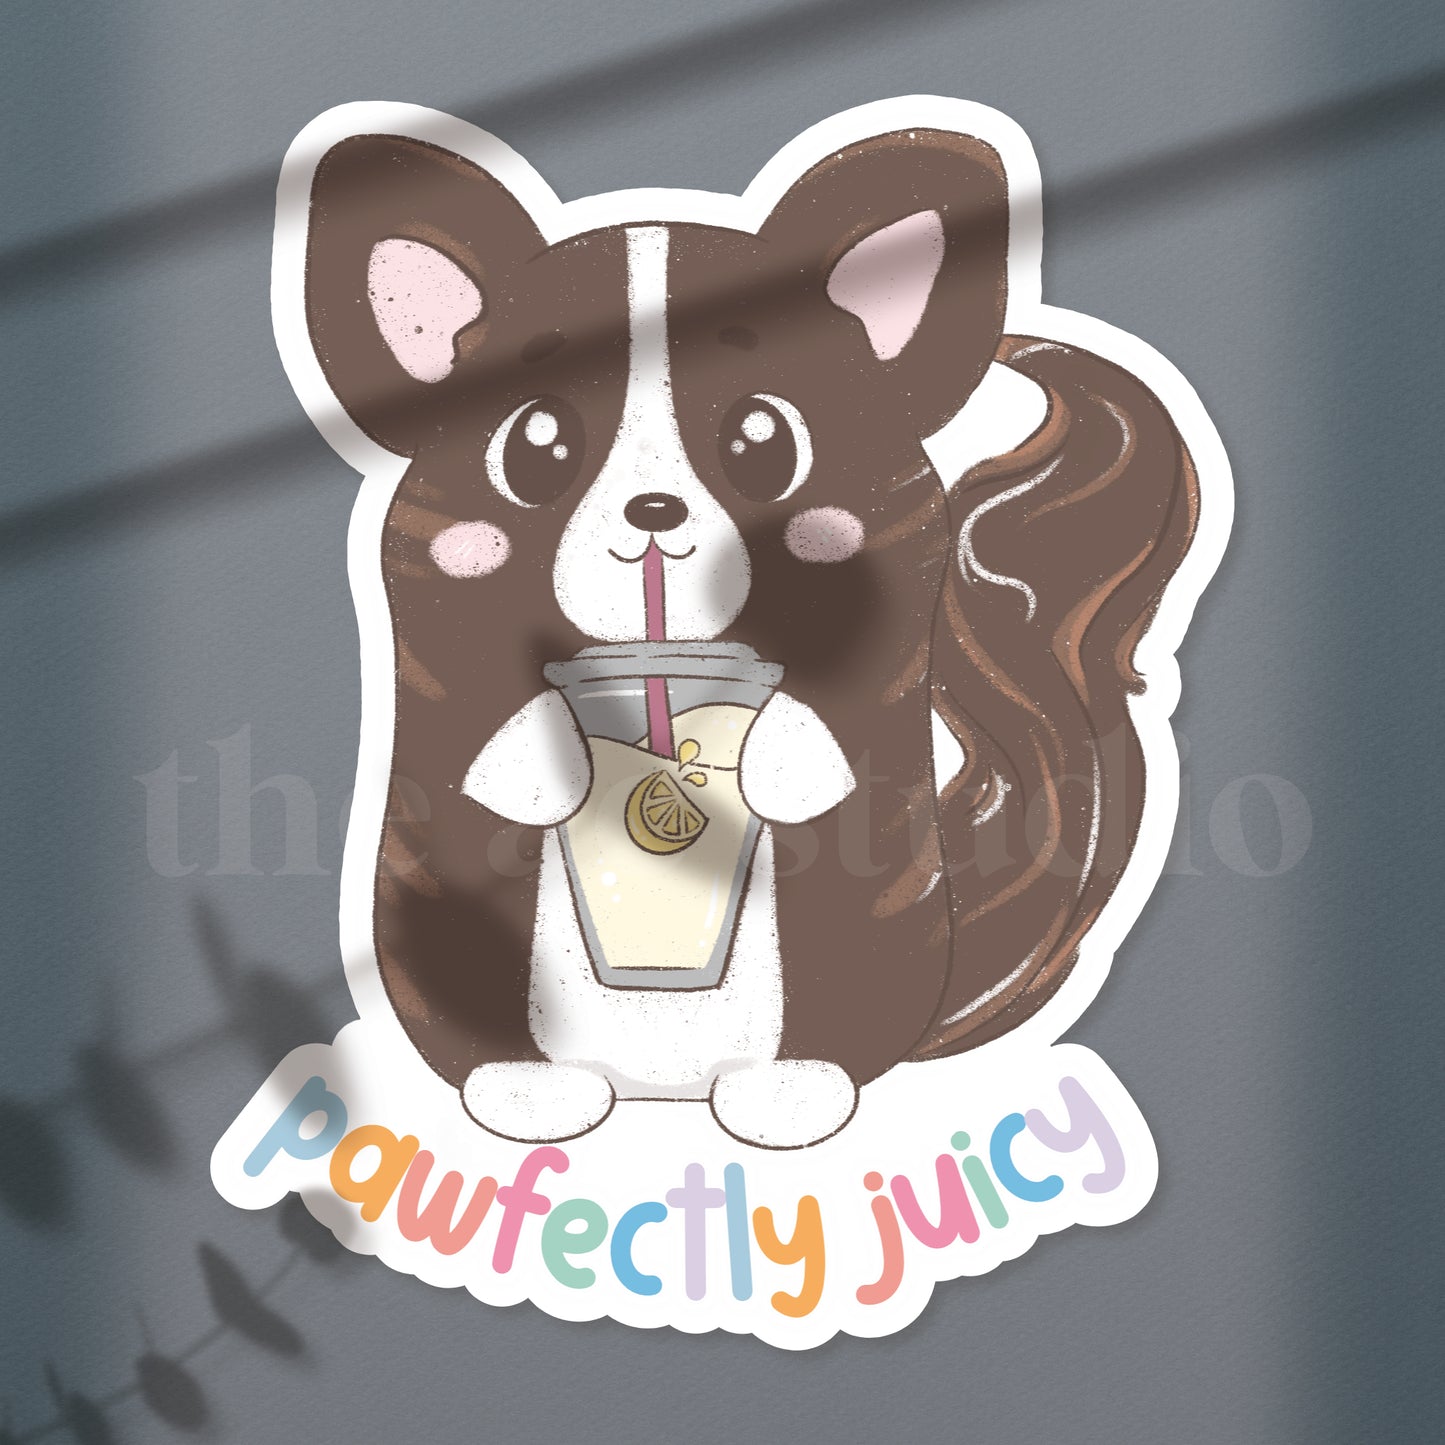 Pawfectly Juicy, Puppy Collection Sticker